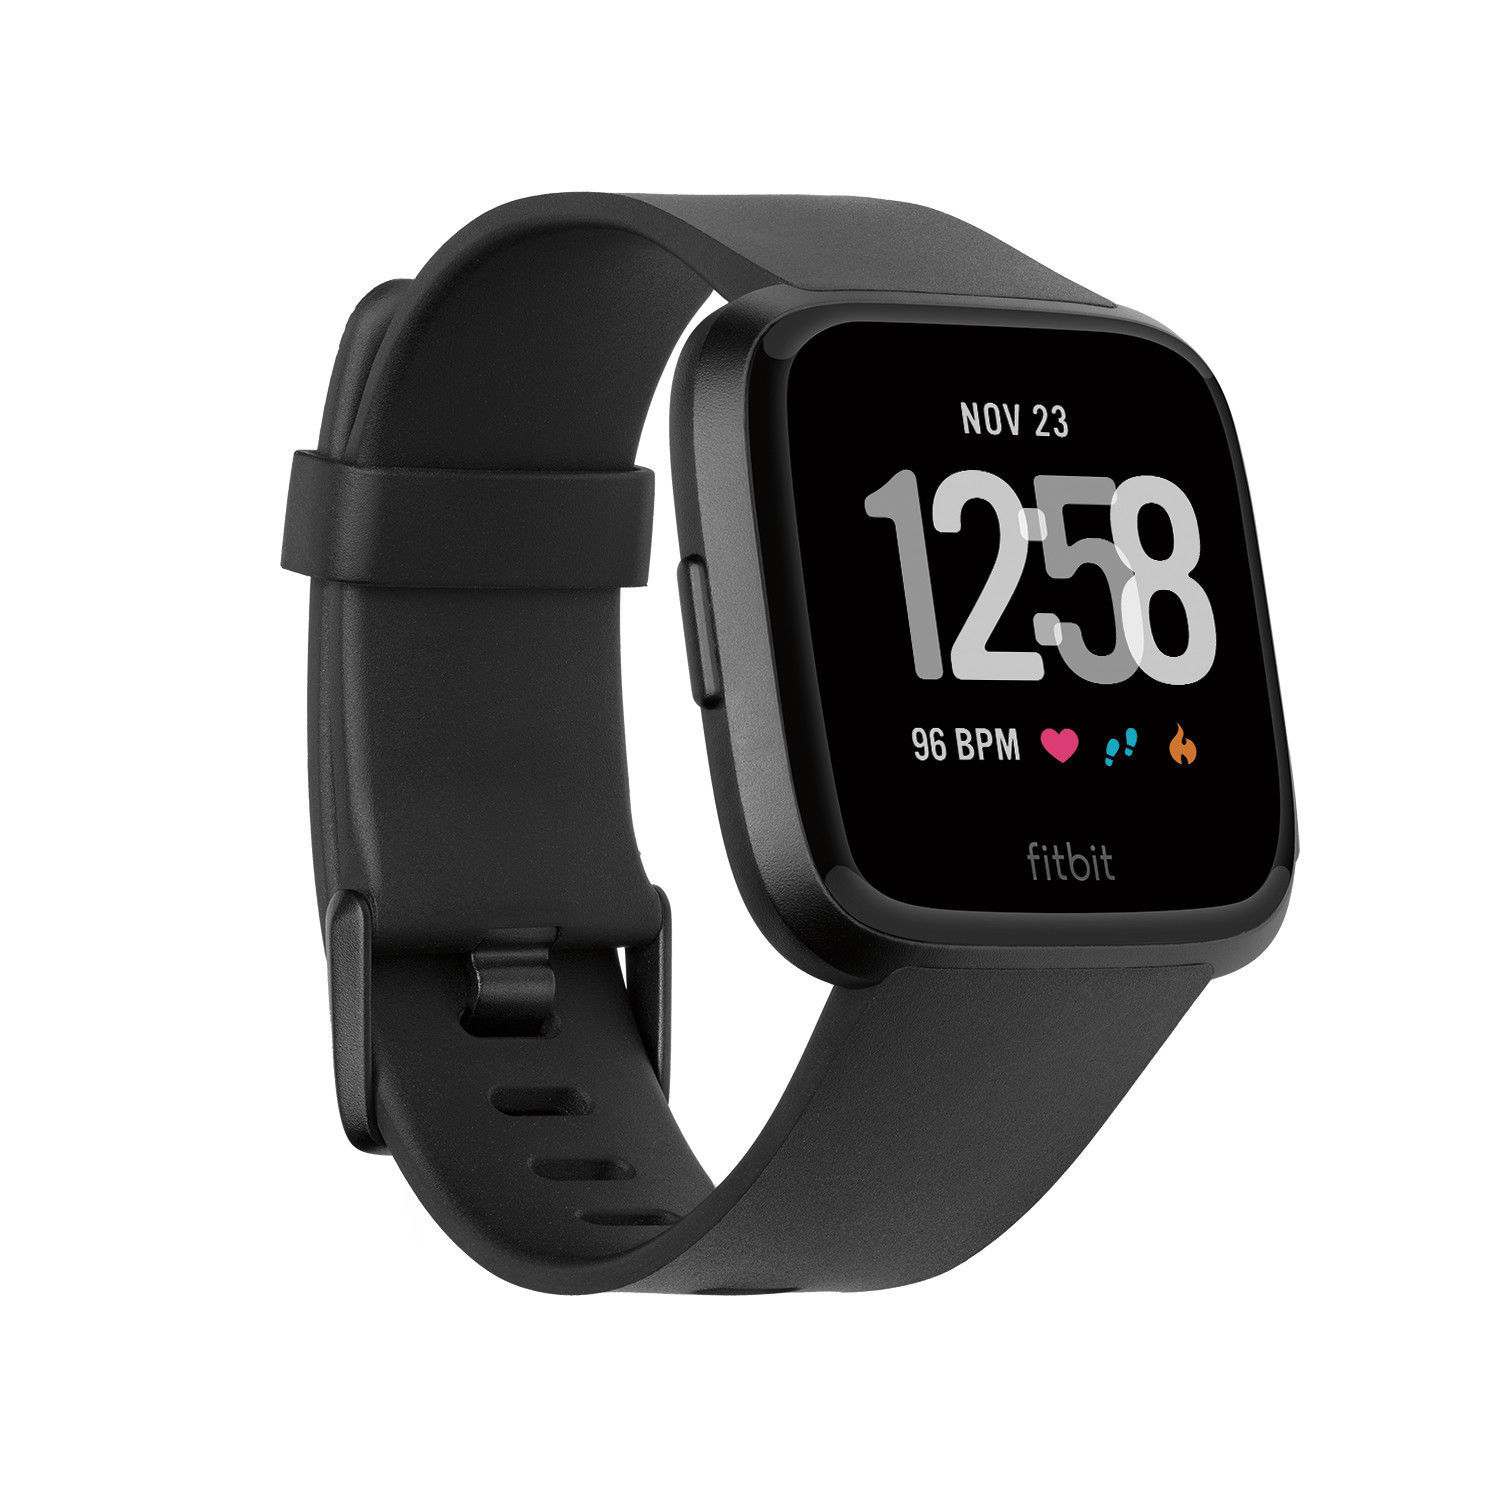 New Fitbit Versa Smartwatch (Pebble Only) - Activity Trackers